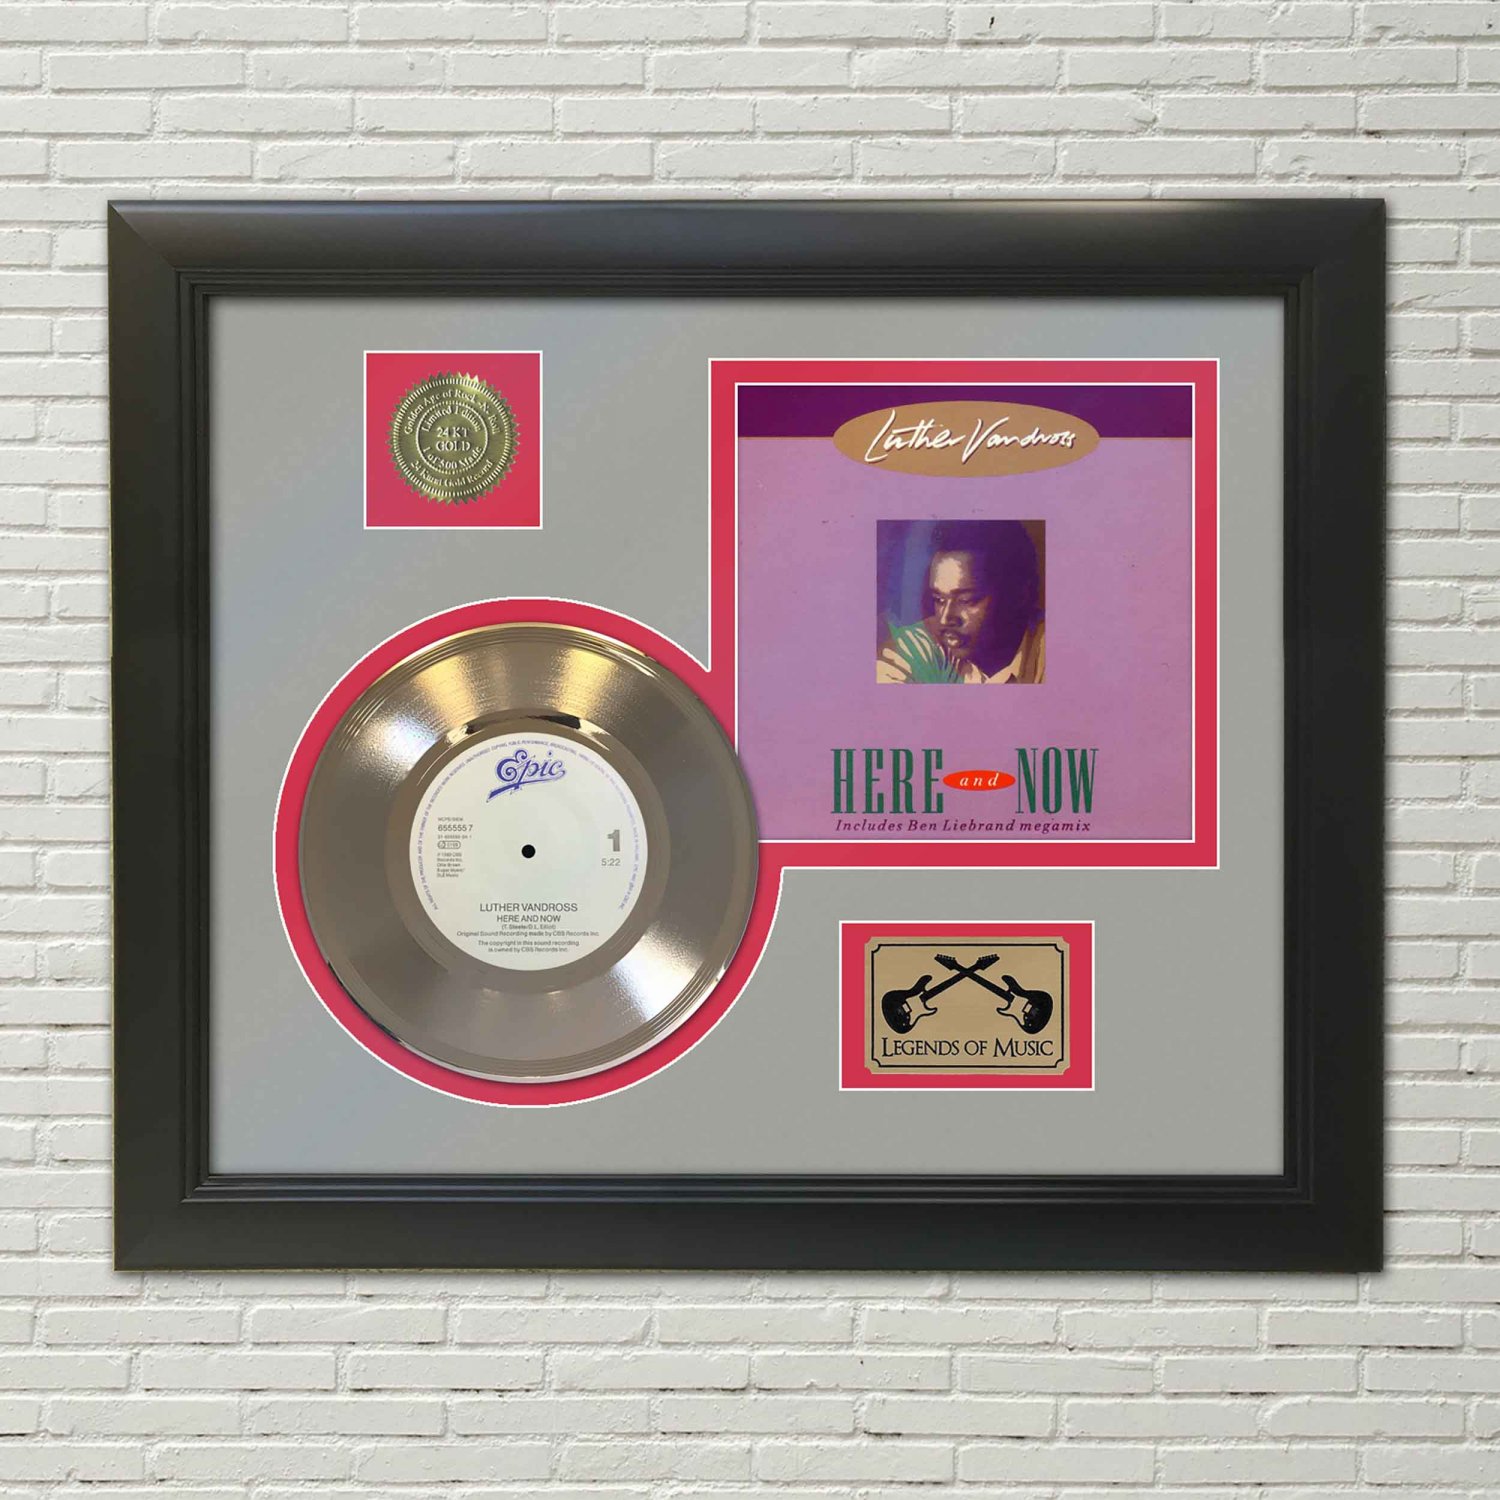 LUTHER VANDROSS "Here and Now"  Framed Picture Sleeve Gold 45 Record Display